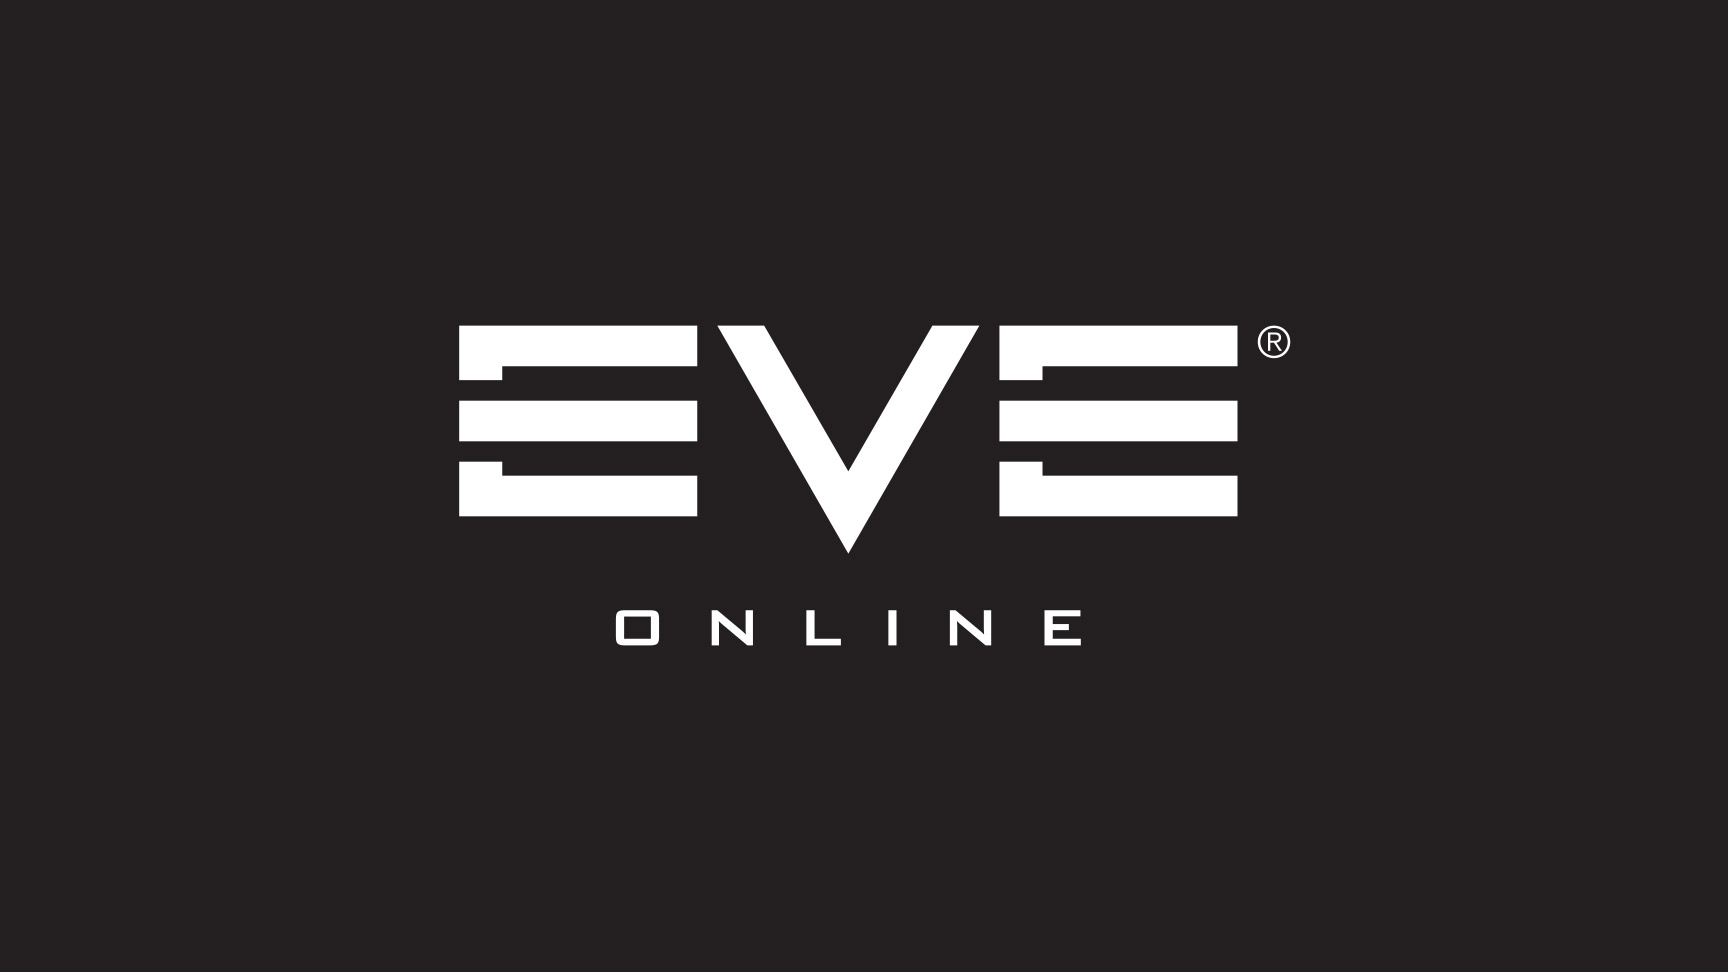 Eve patch download 2016 torrent